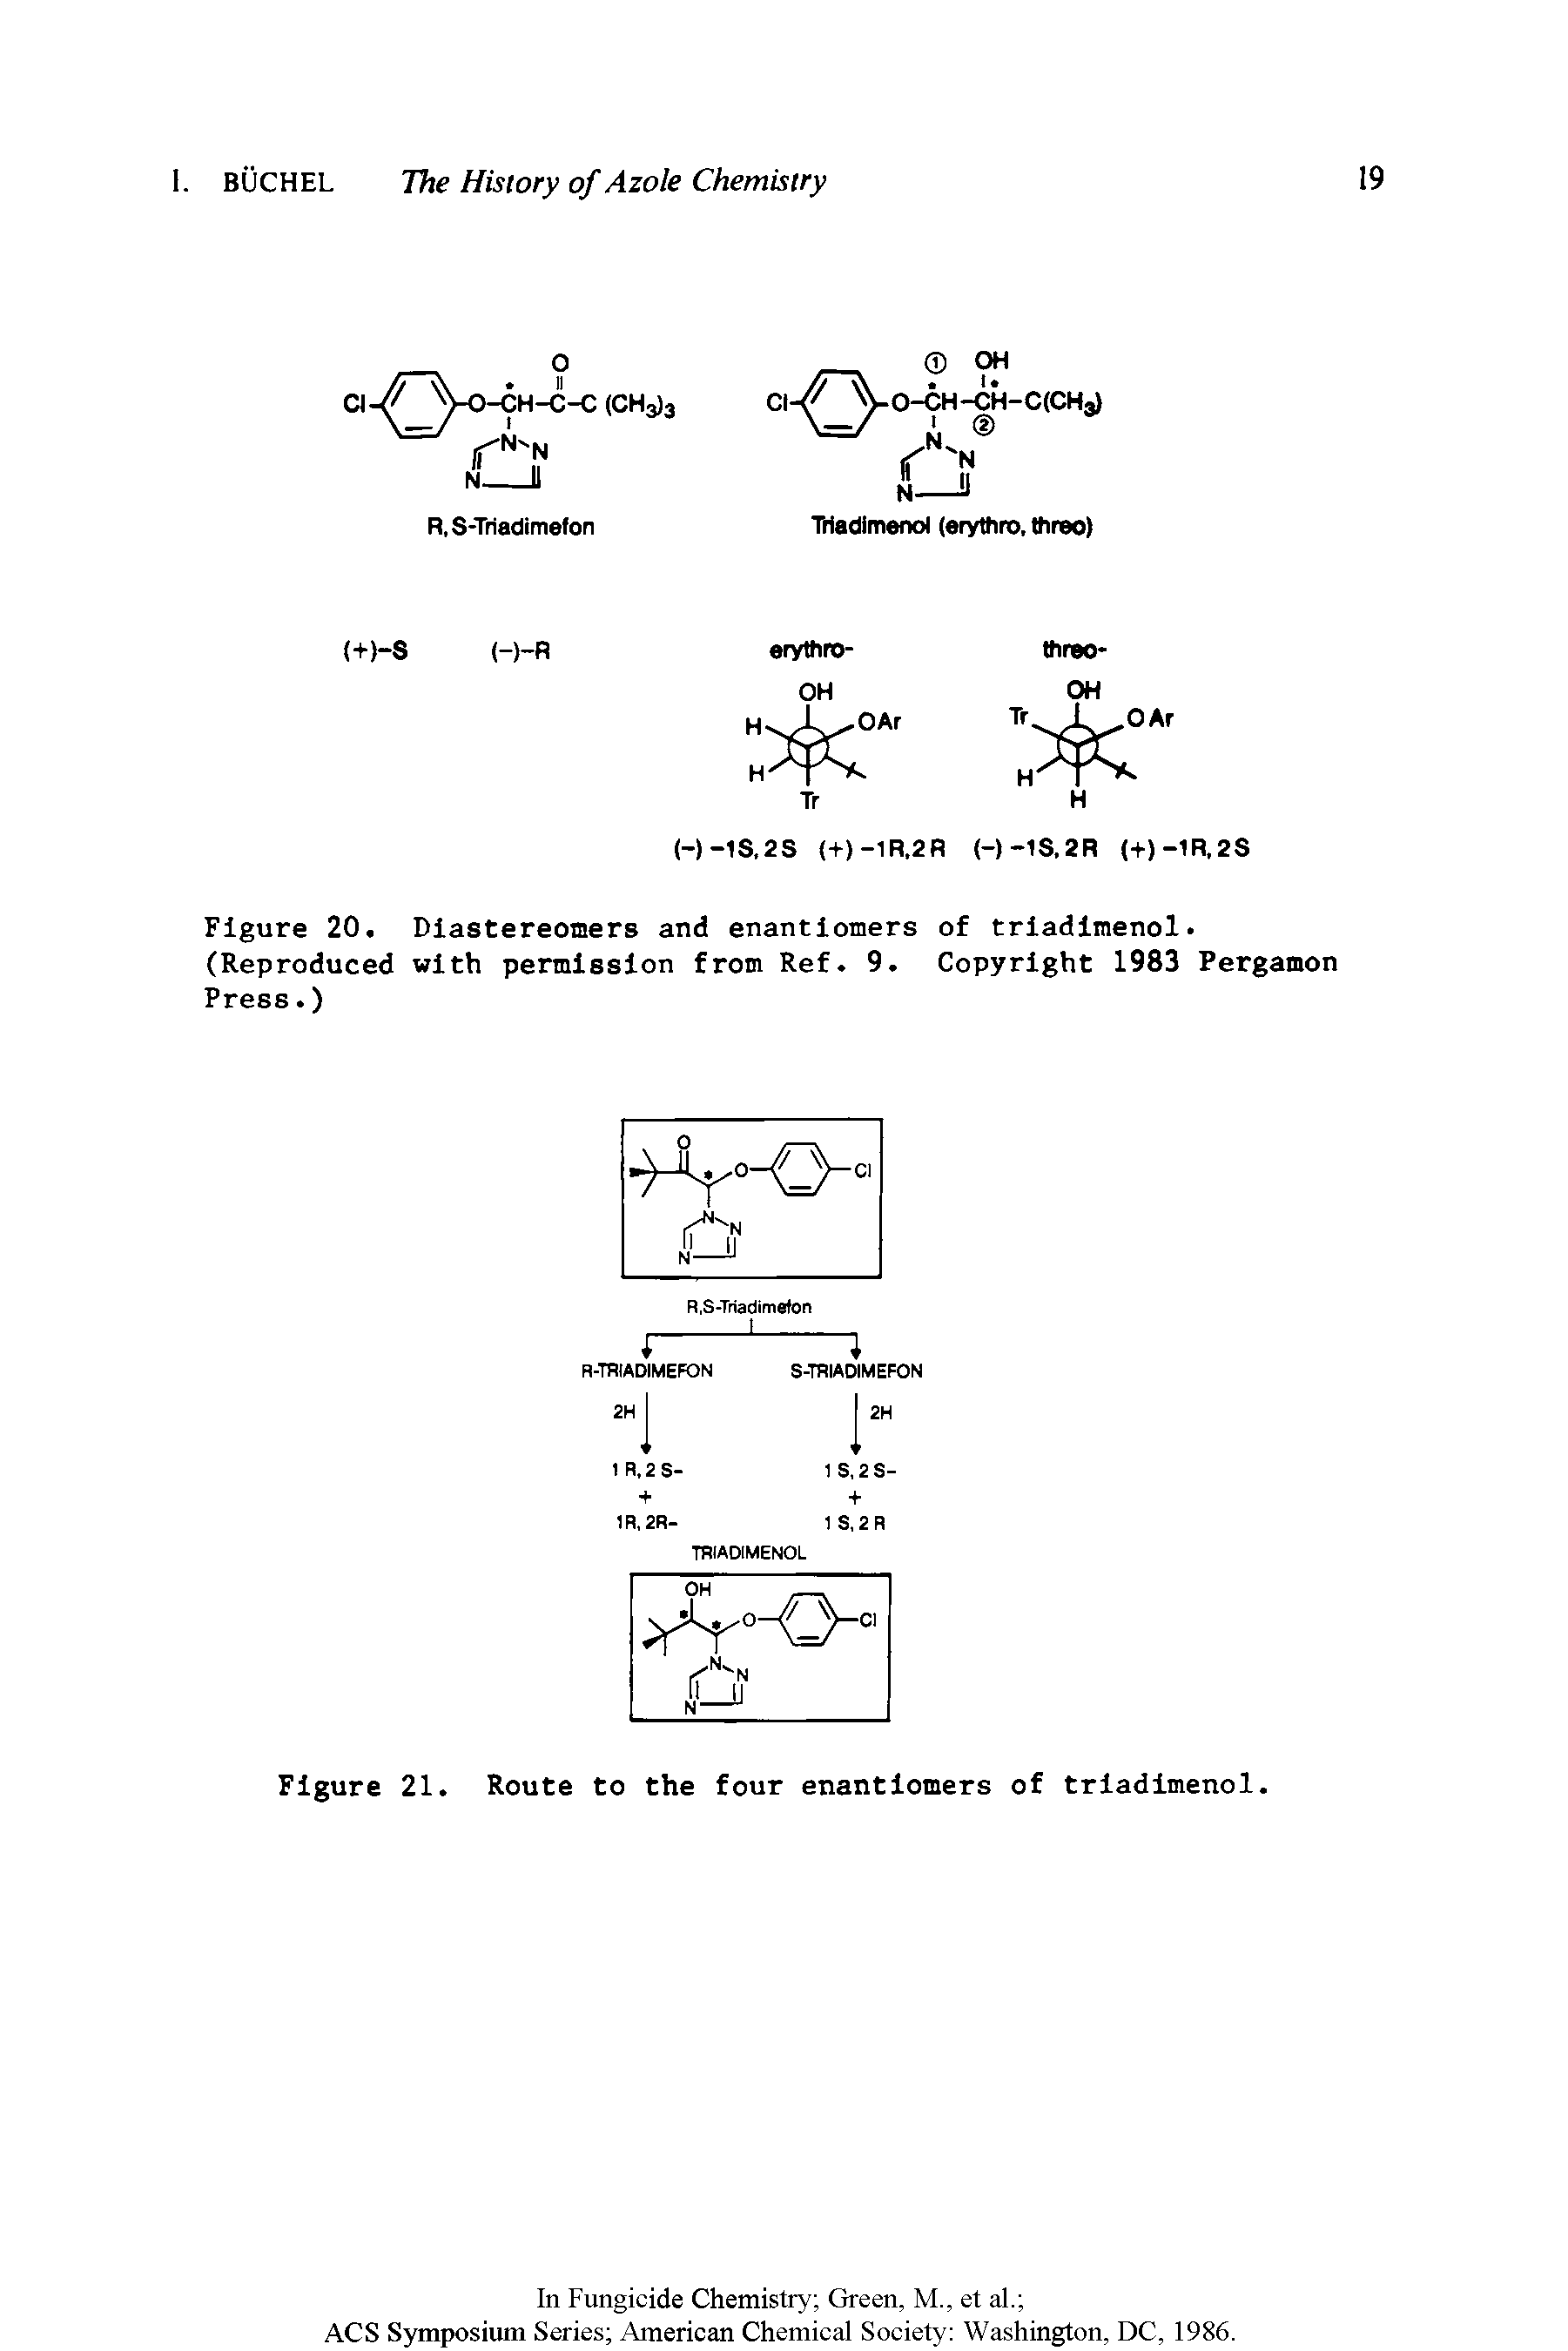 Figure 20, Diastereomers and enantiomers of triadimenol (Reproduced with permission from Ref 9 Copyright 1983 Pergamon Press.)...